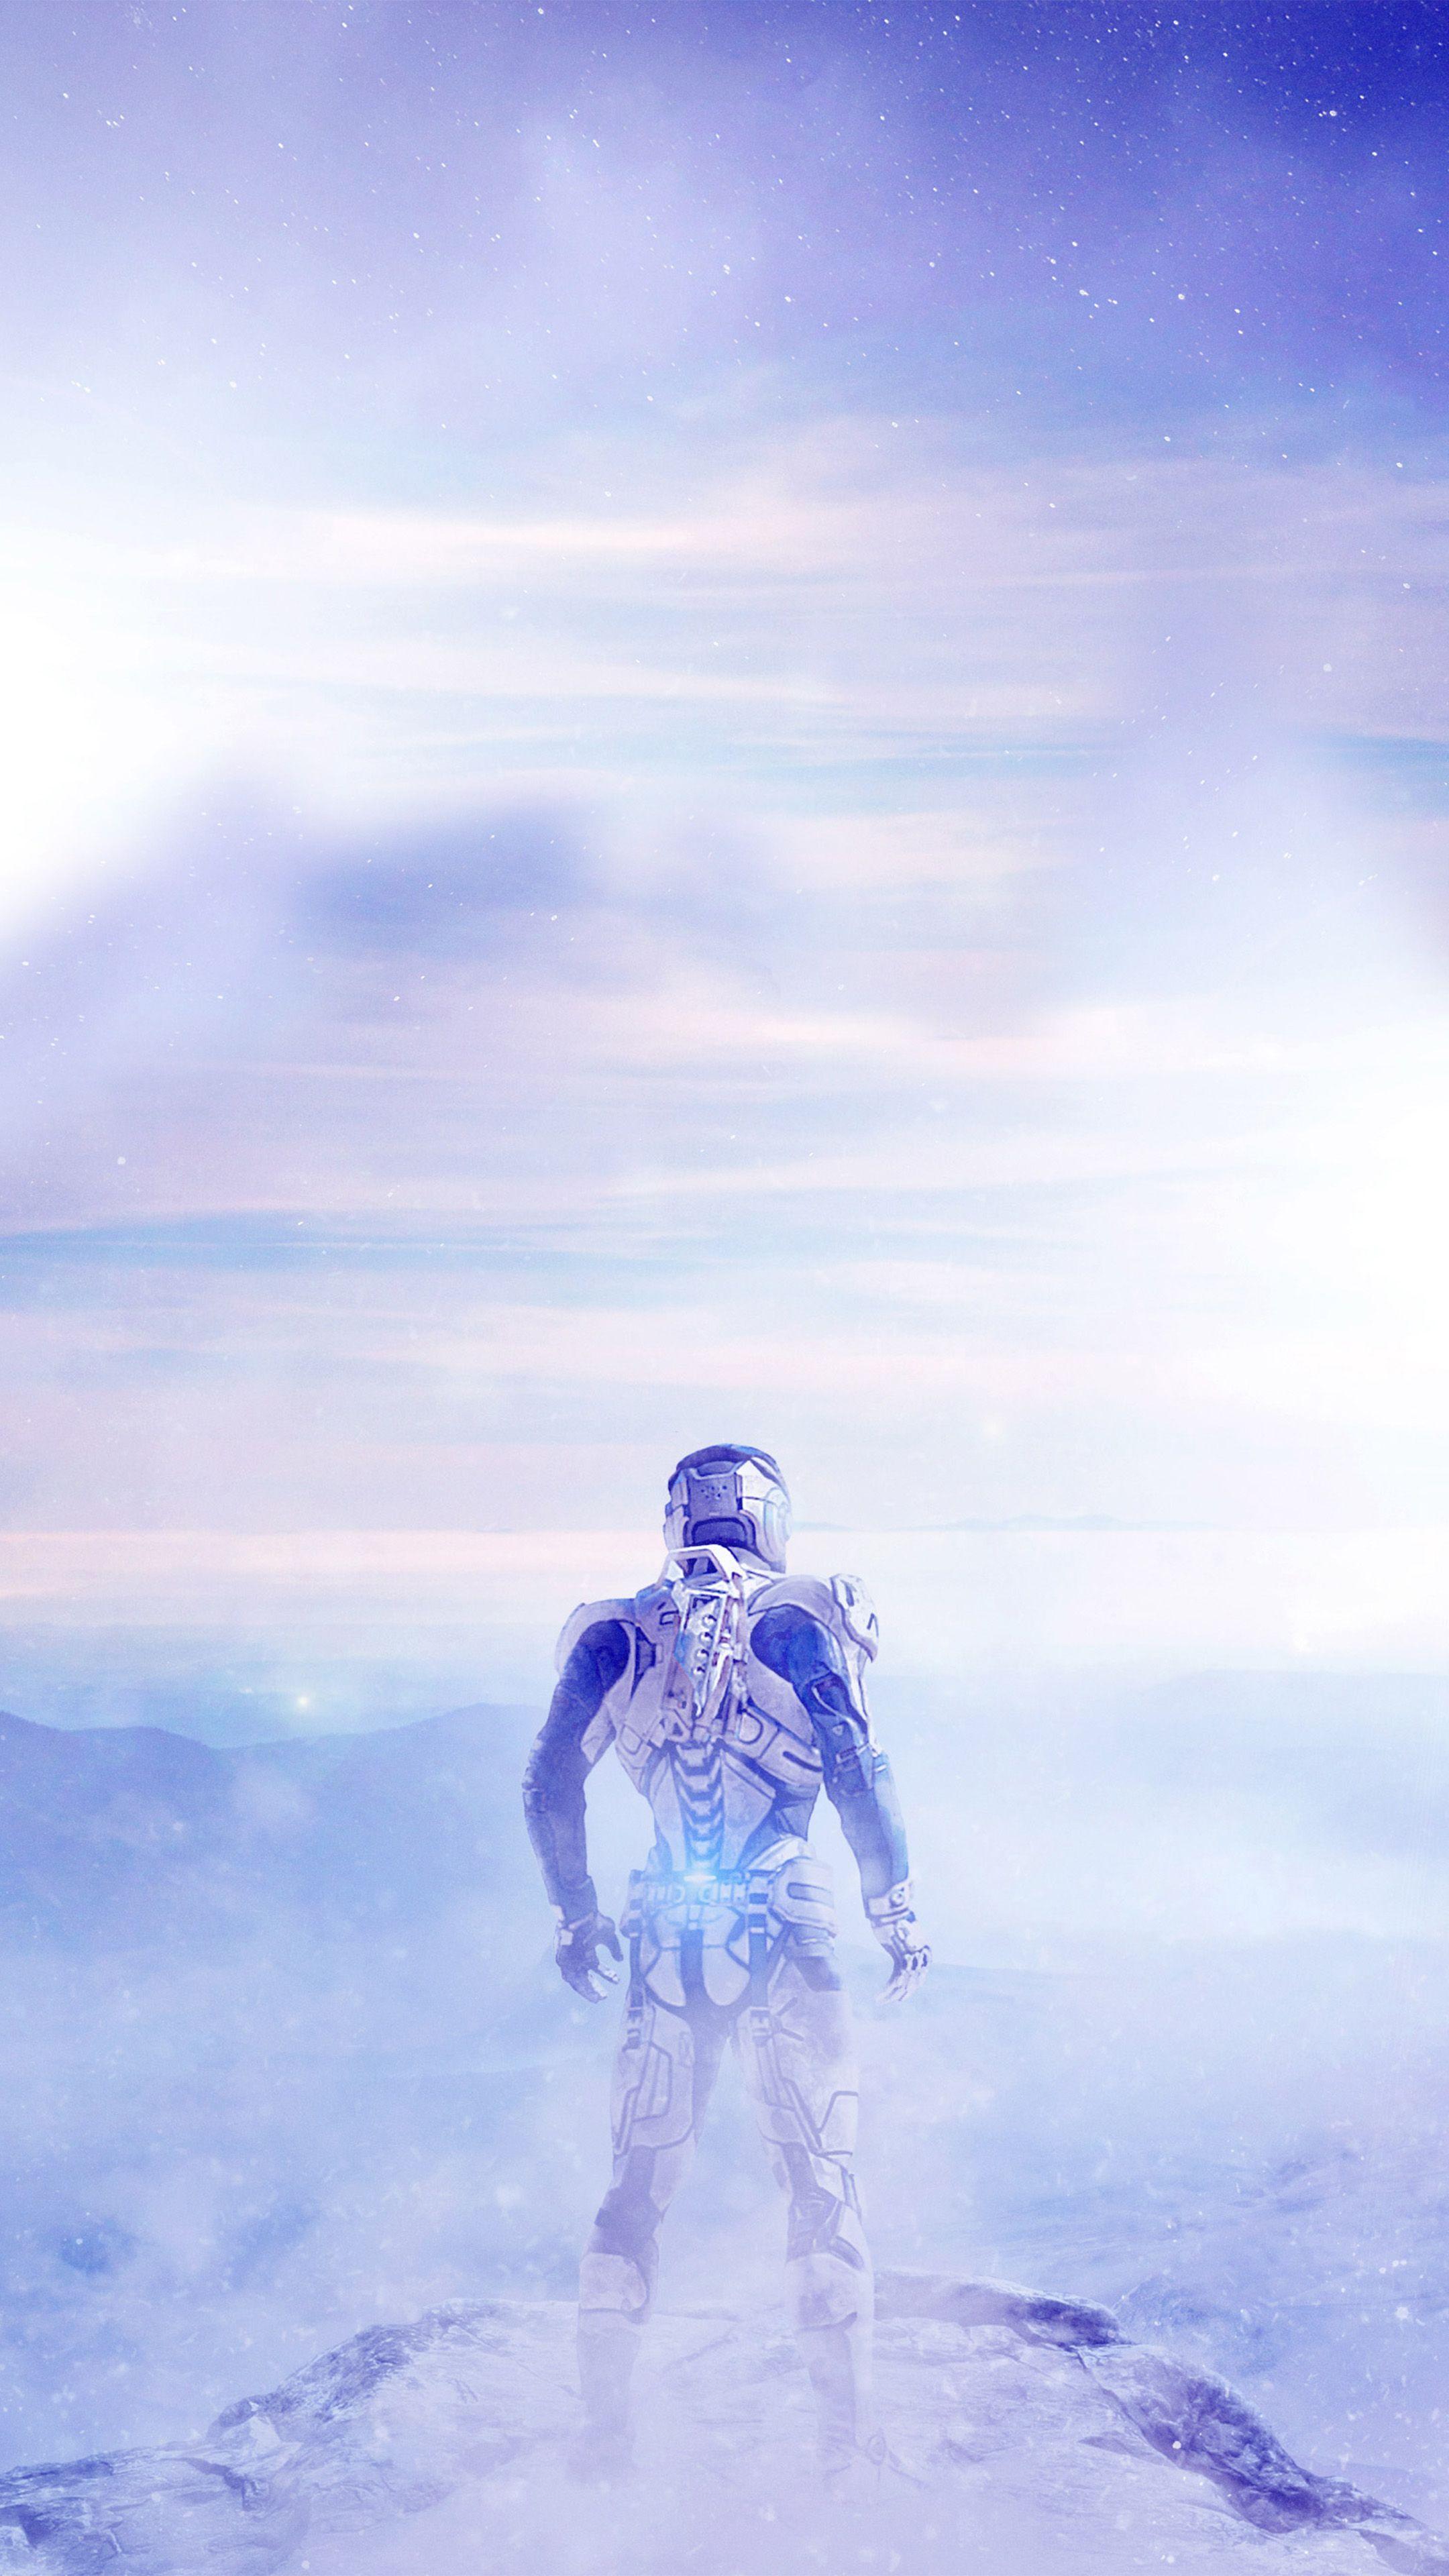 Mass Effect download the new version for iphone